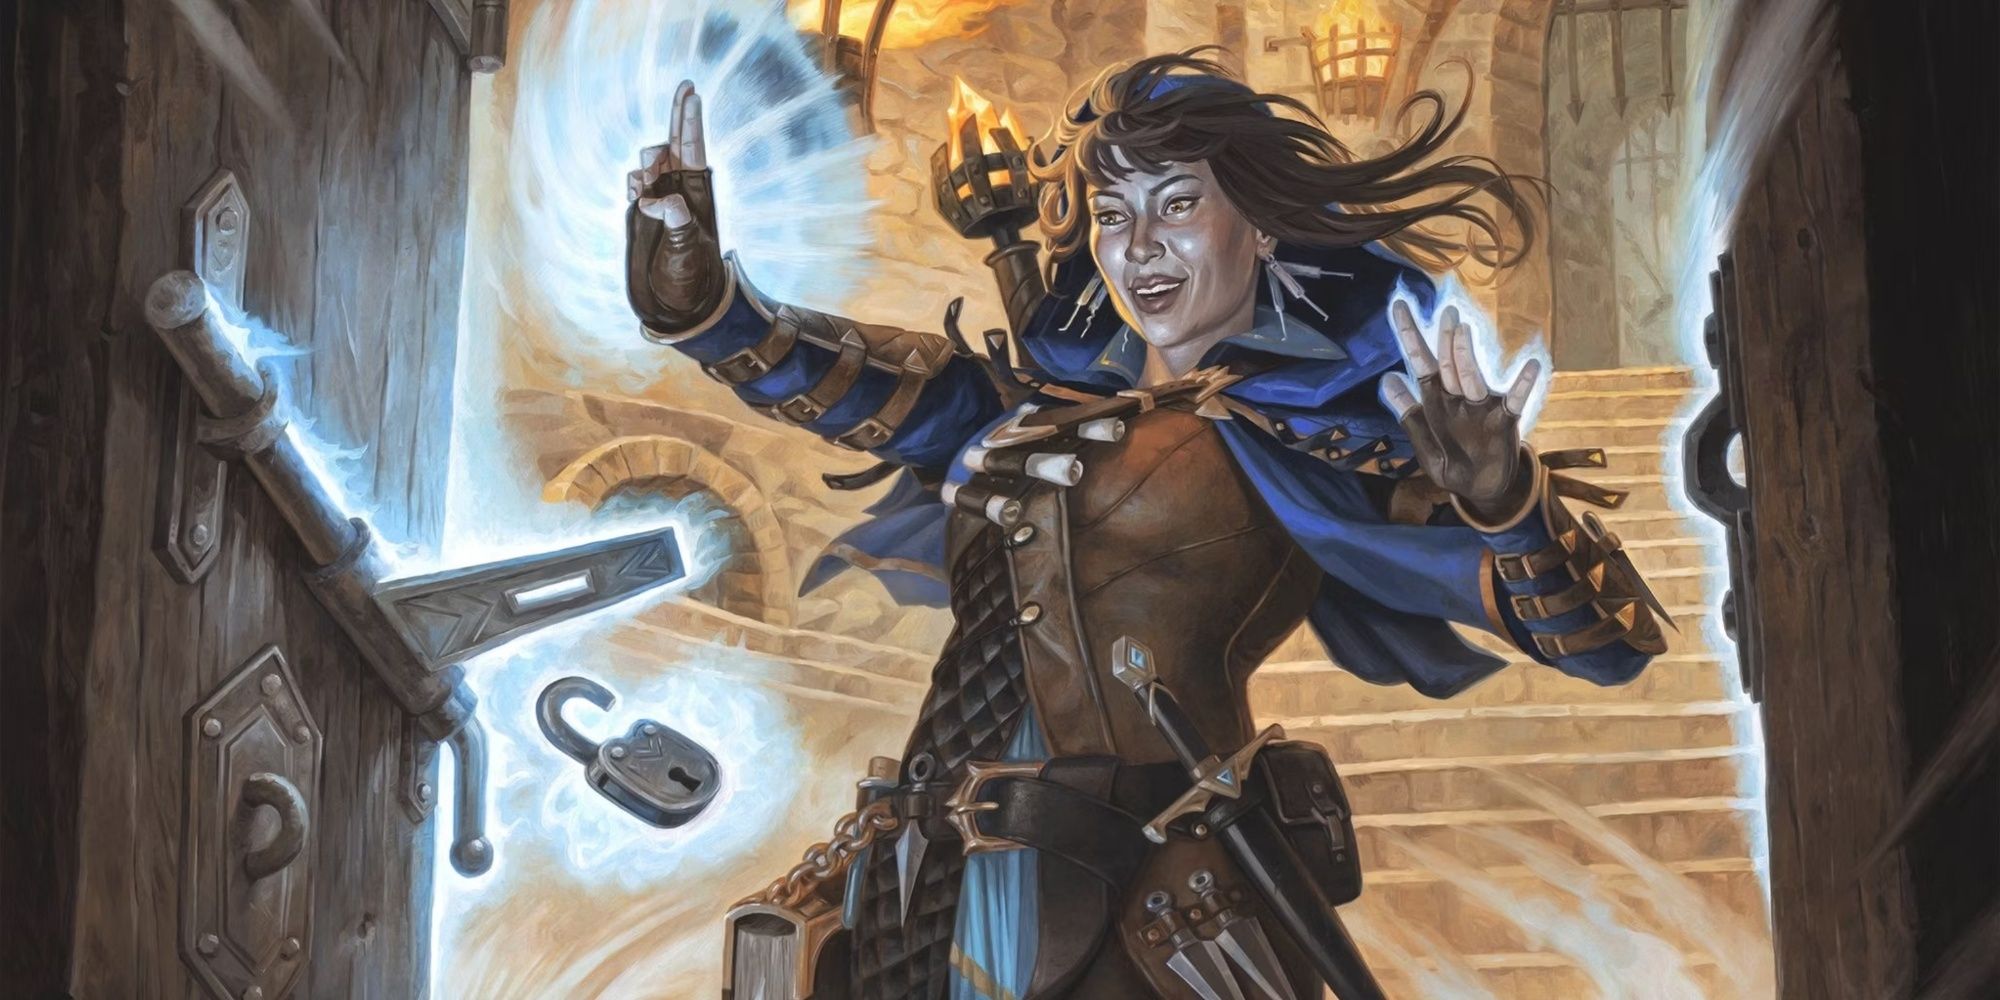 Dungeons & Dragons In Imoen, Mystic Trickster by Alix Branwyn, a rogue disables a lock with magic